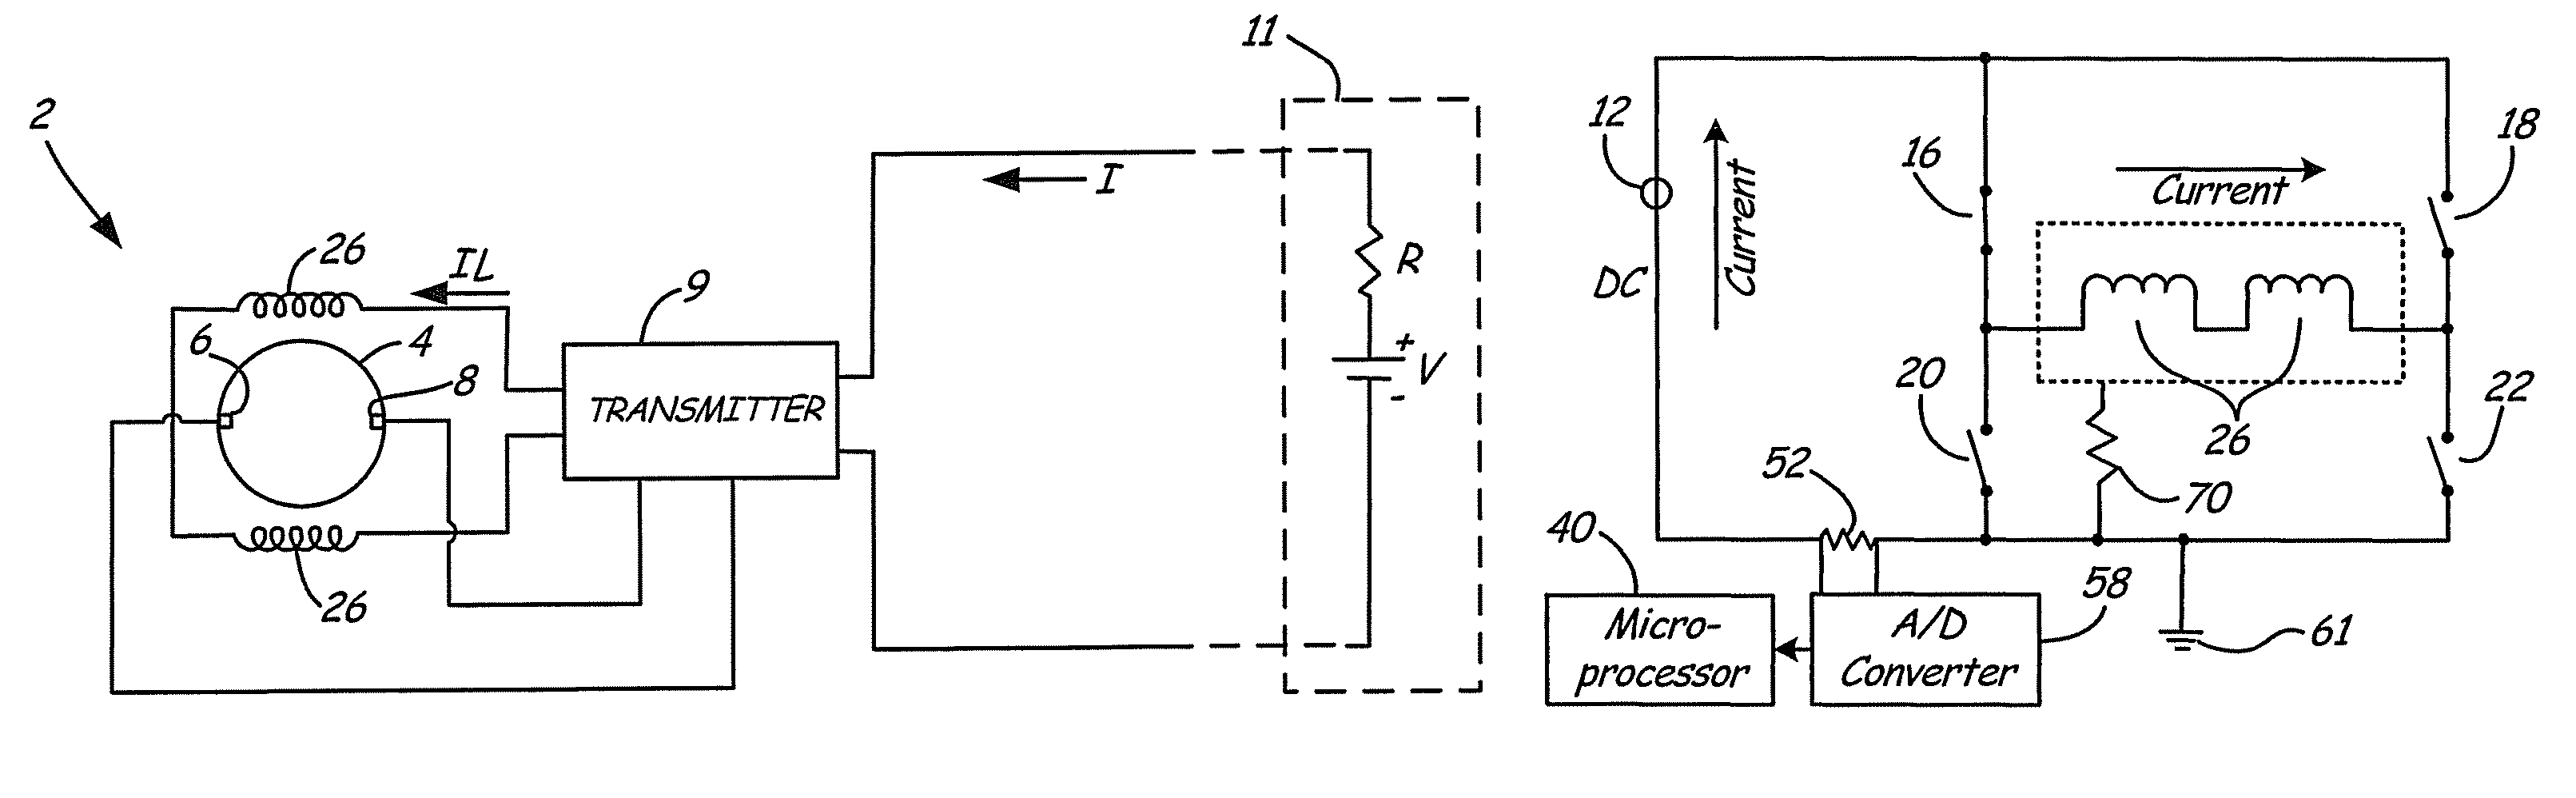 Magnetic flowmeter with coil ground path detection